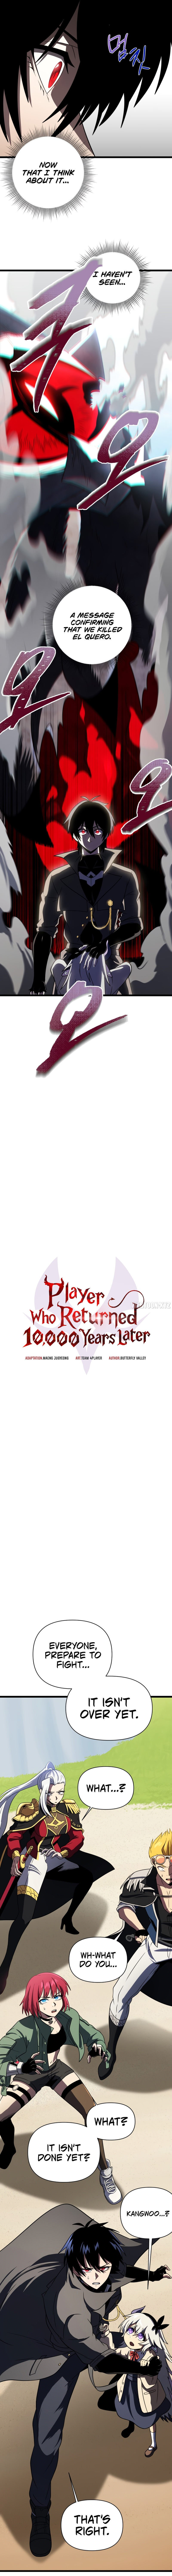 player-who-returned-10000-years-later-chap-62-5